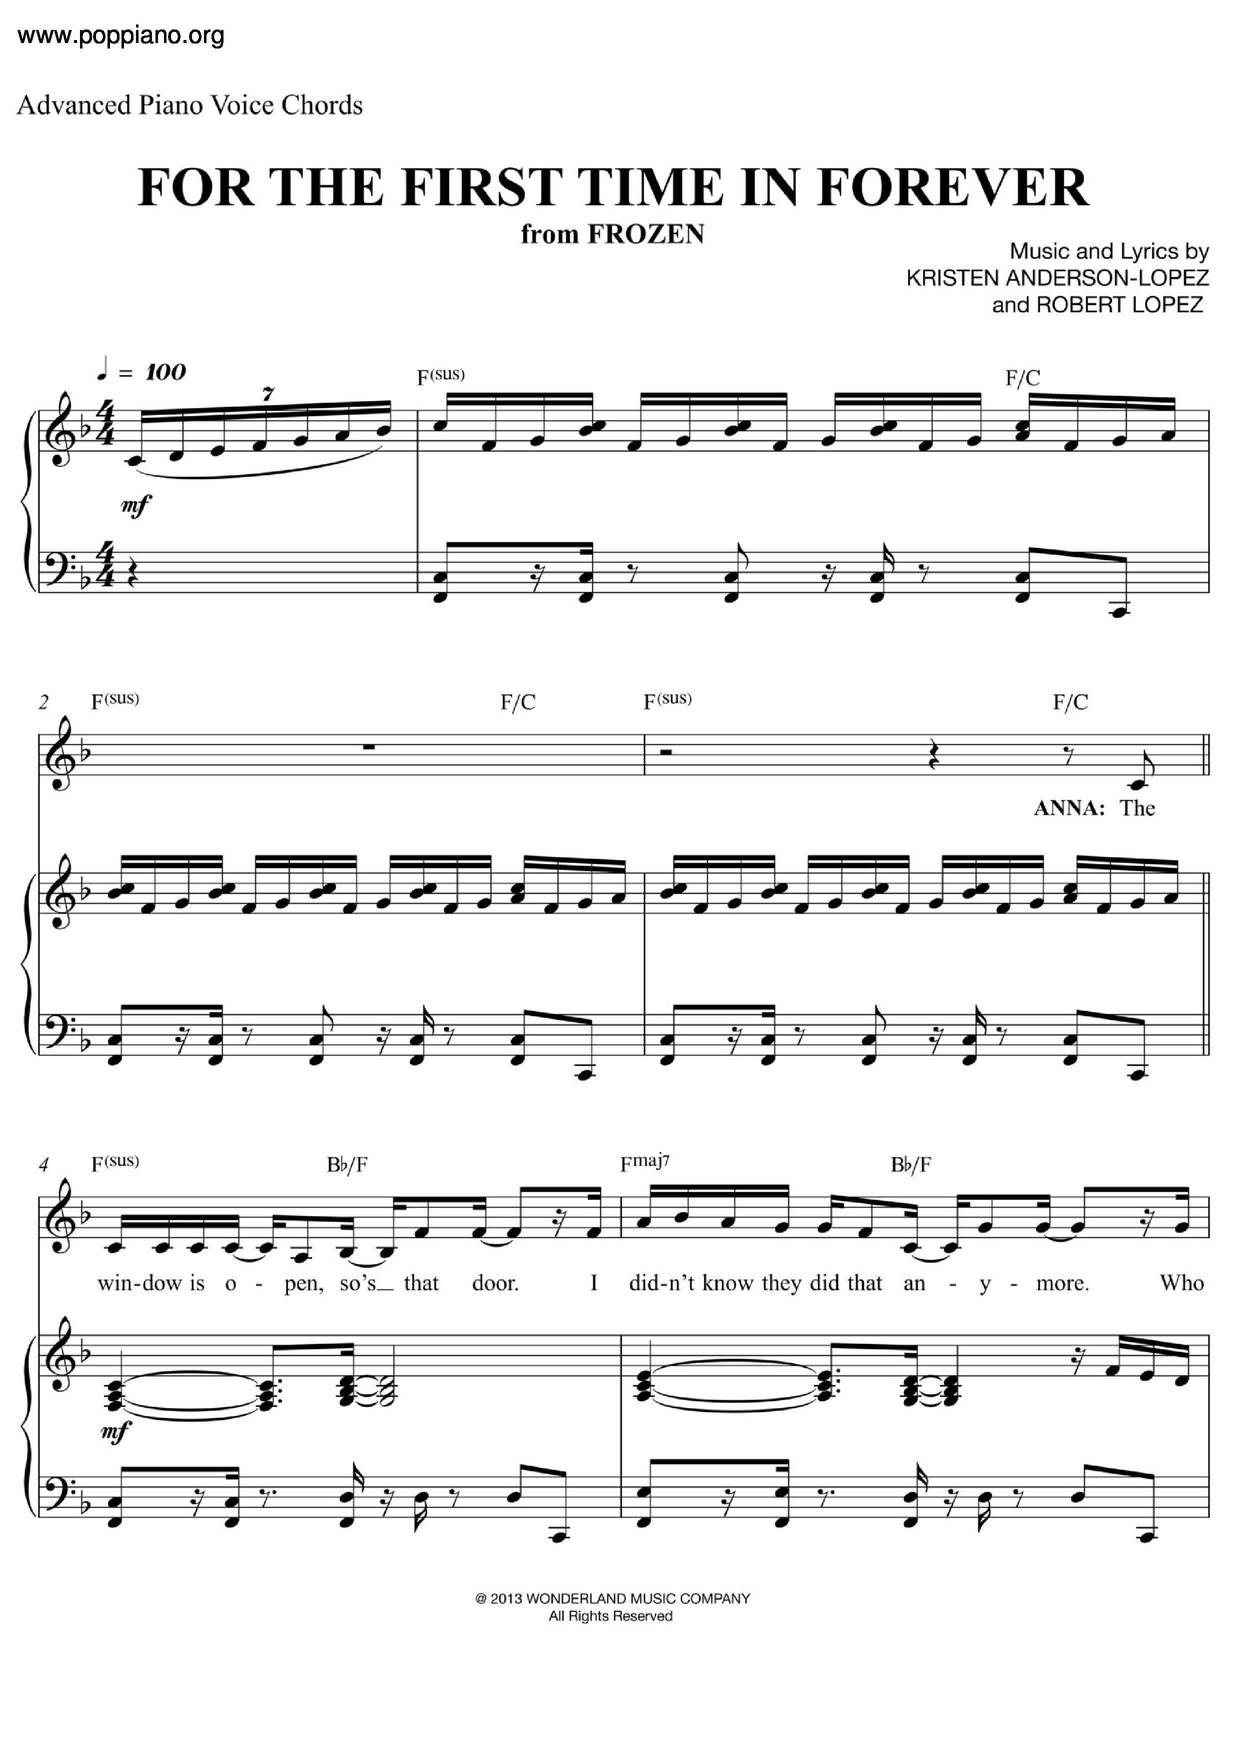 Frozen For The First Time In Forever Sheet Music Pdf アナと雪の女王 Free Score Download